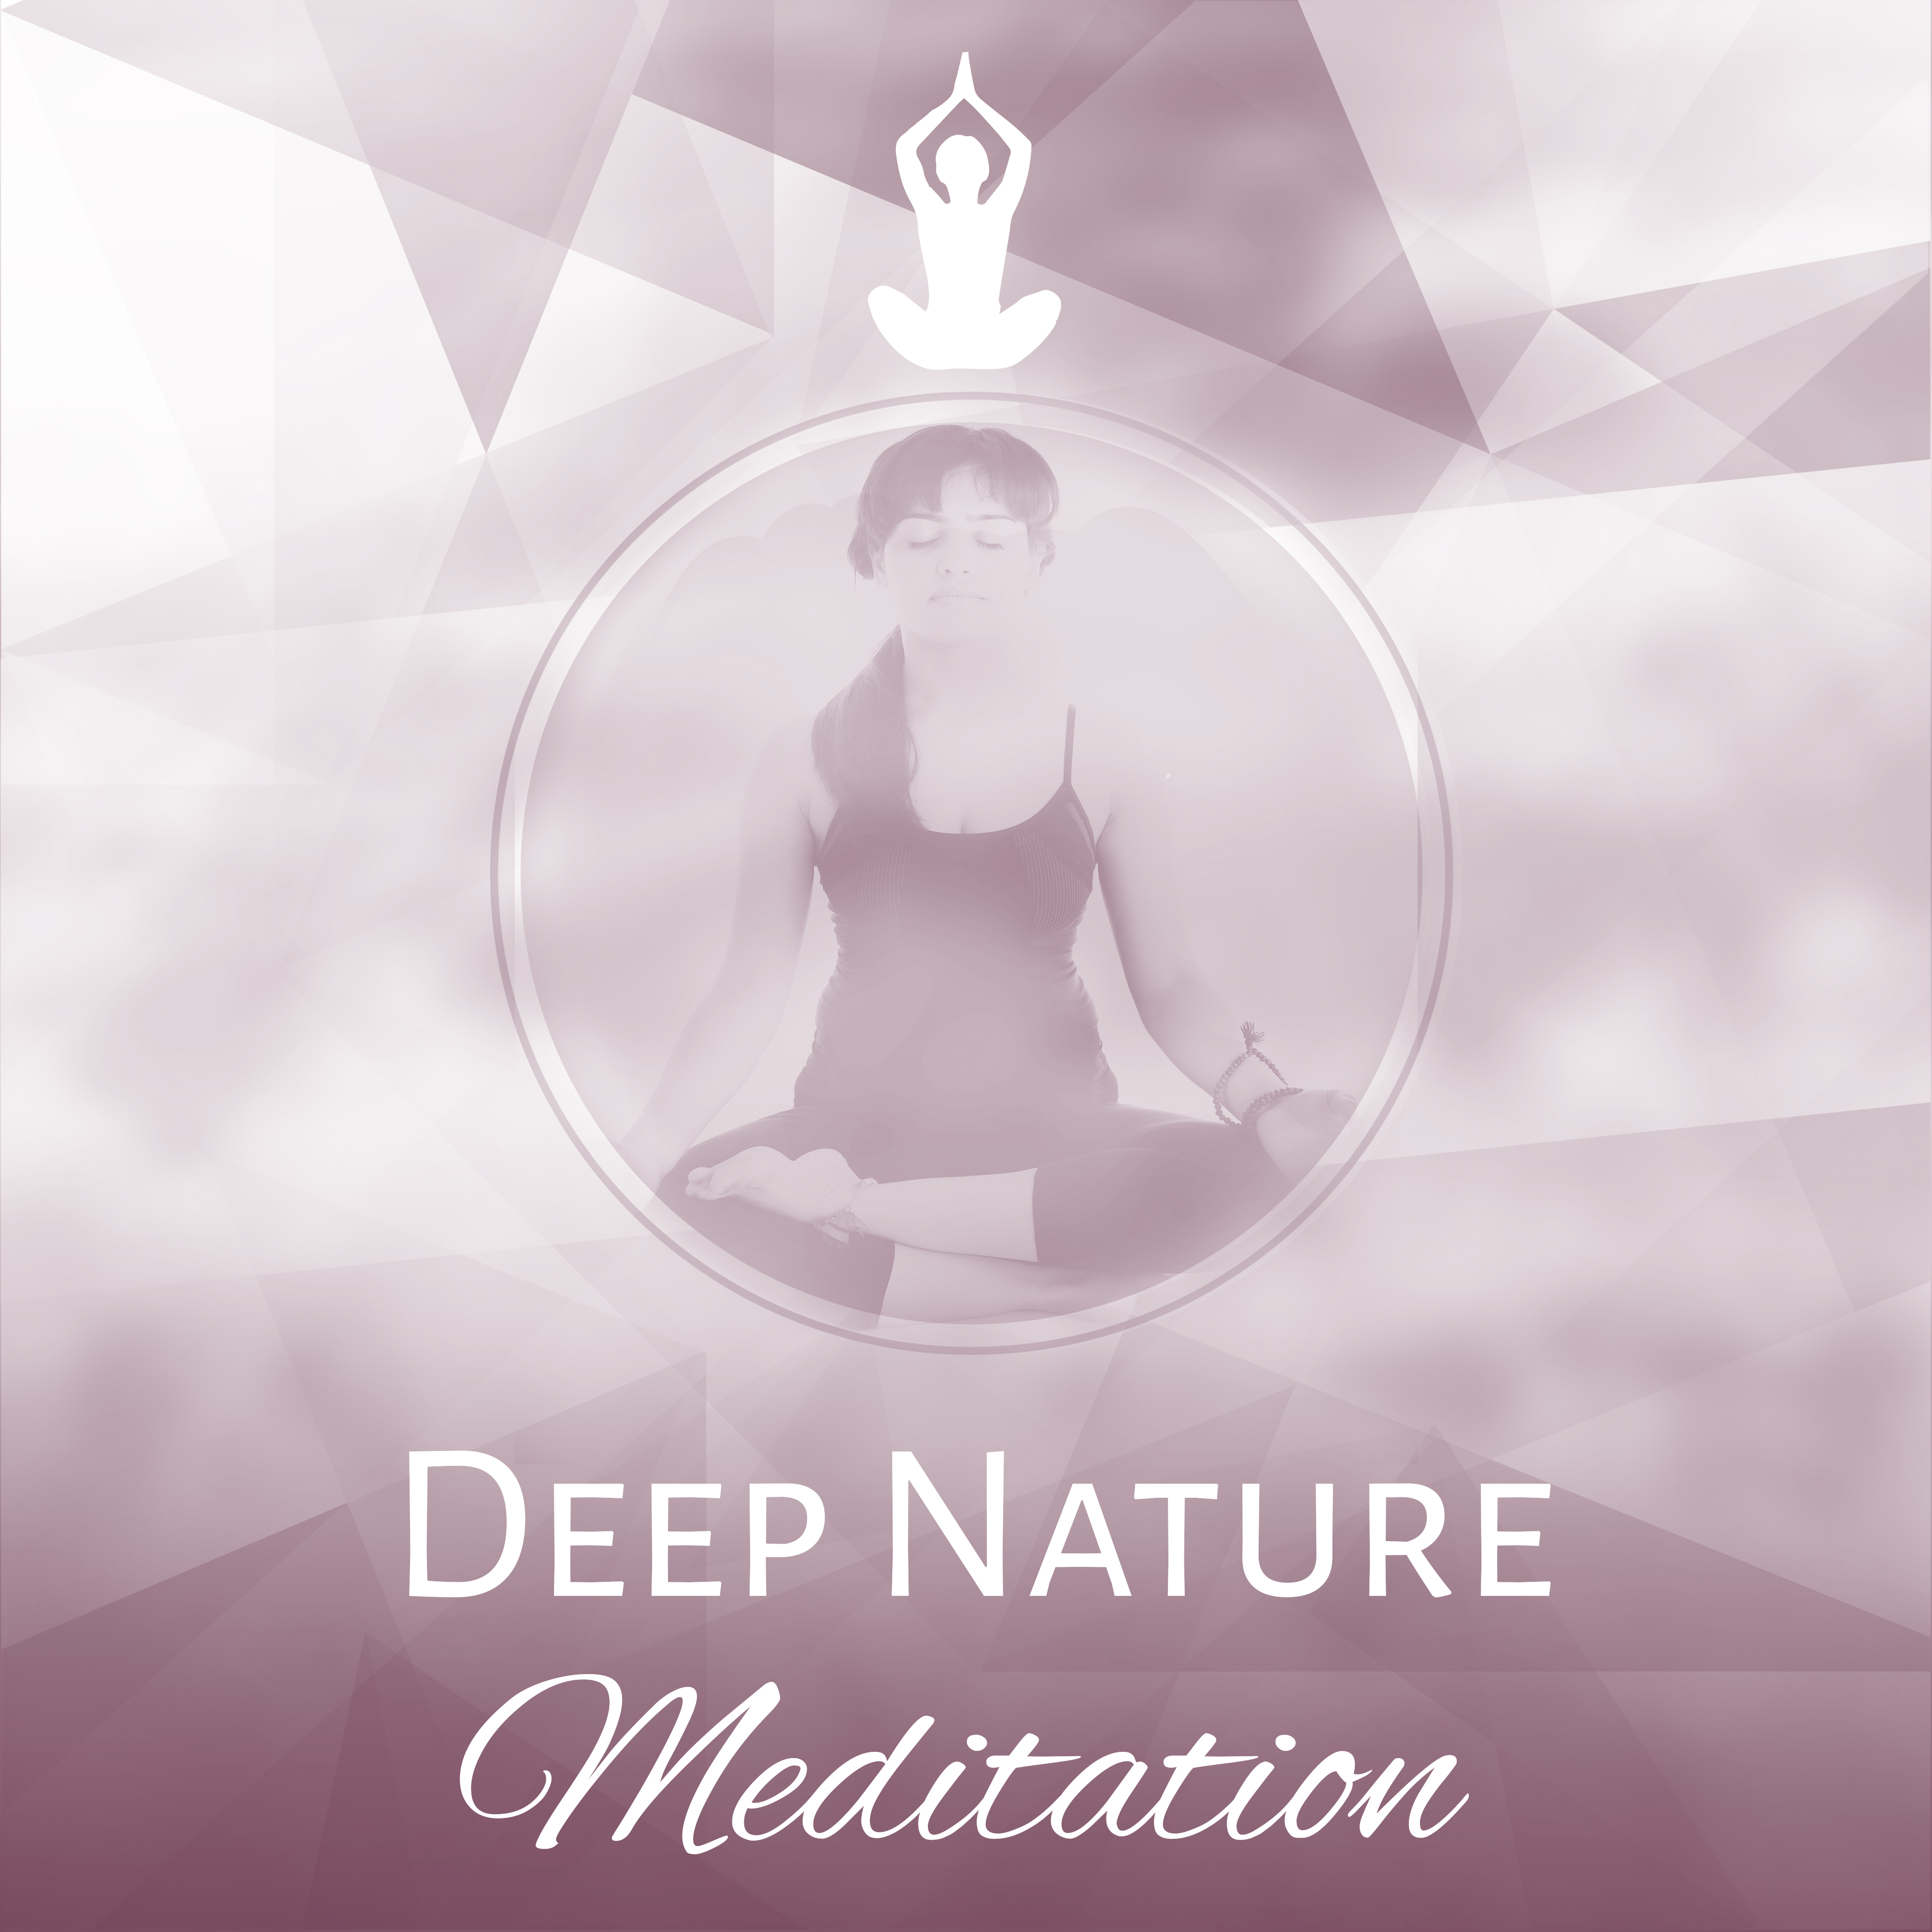 Deep Nature Meditation  Nature 2017, Concentration, Zen Relaxing Track